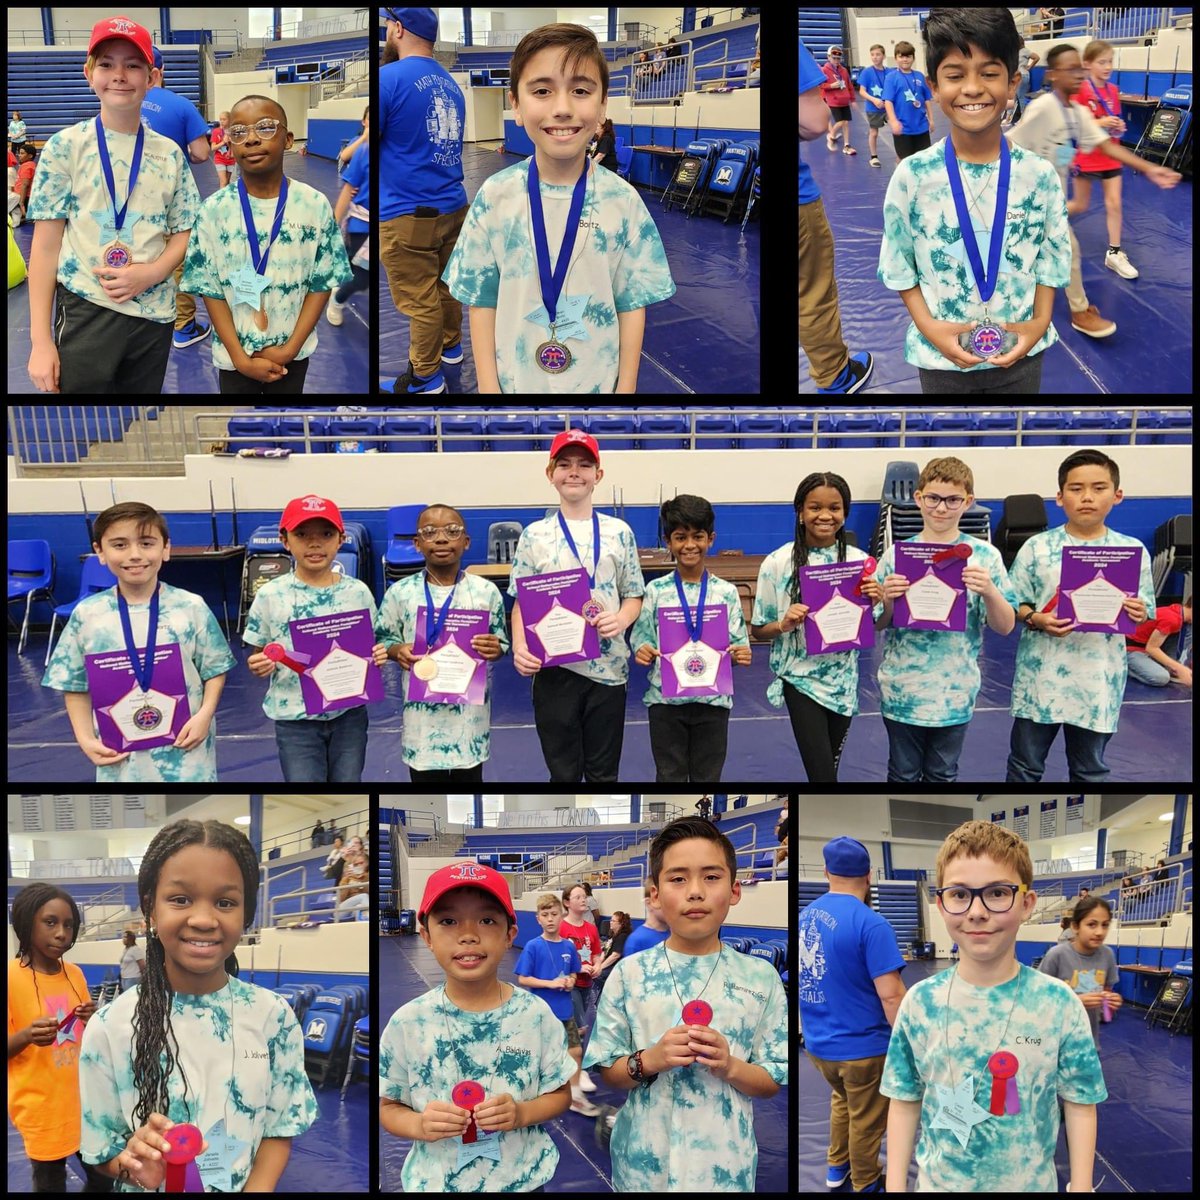 Watson MST was the only Garland ISD school to compete at the Mathematics Pentathlon tournament in Midlothian. There was a total of 200 participants, and four of our students came home with medals! Congratulations to our @Watson_Wildcats Pentathletes! ➕➗

#TheGISDEffect